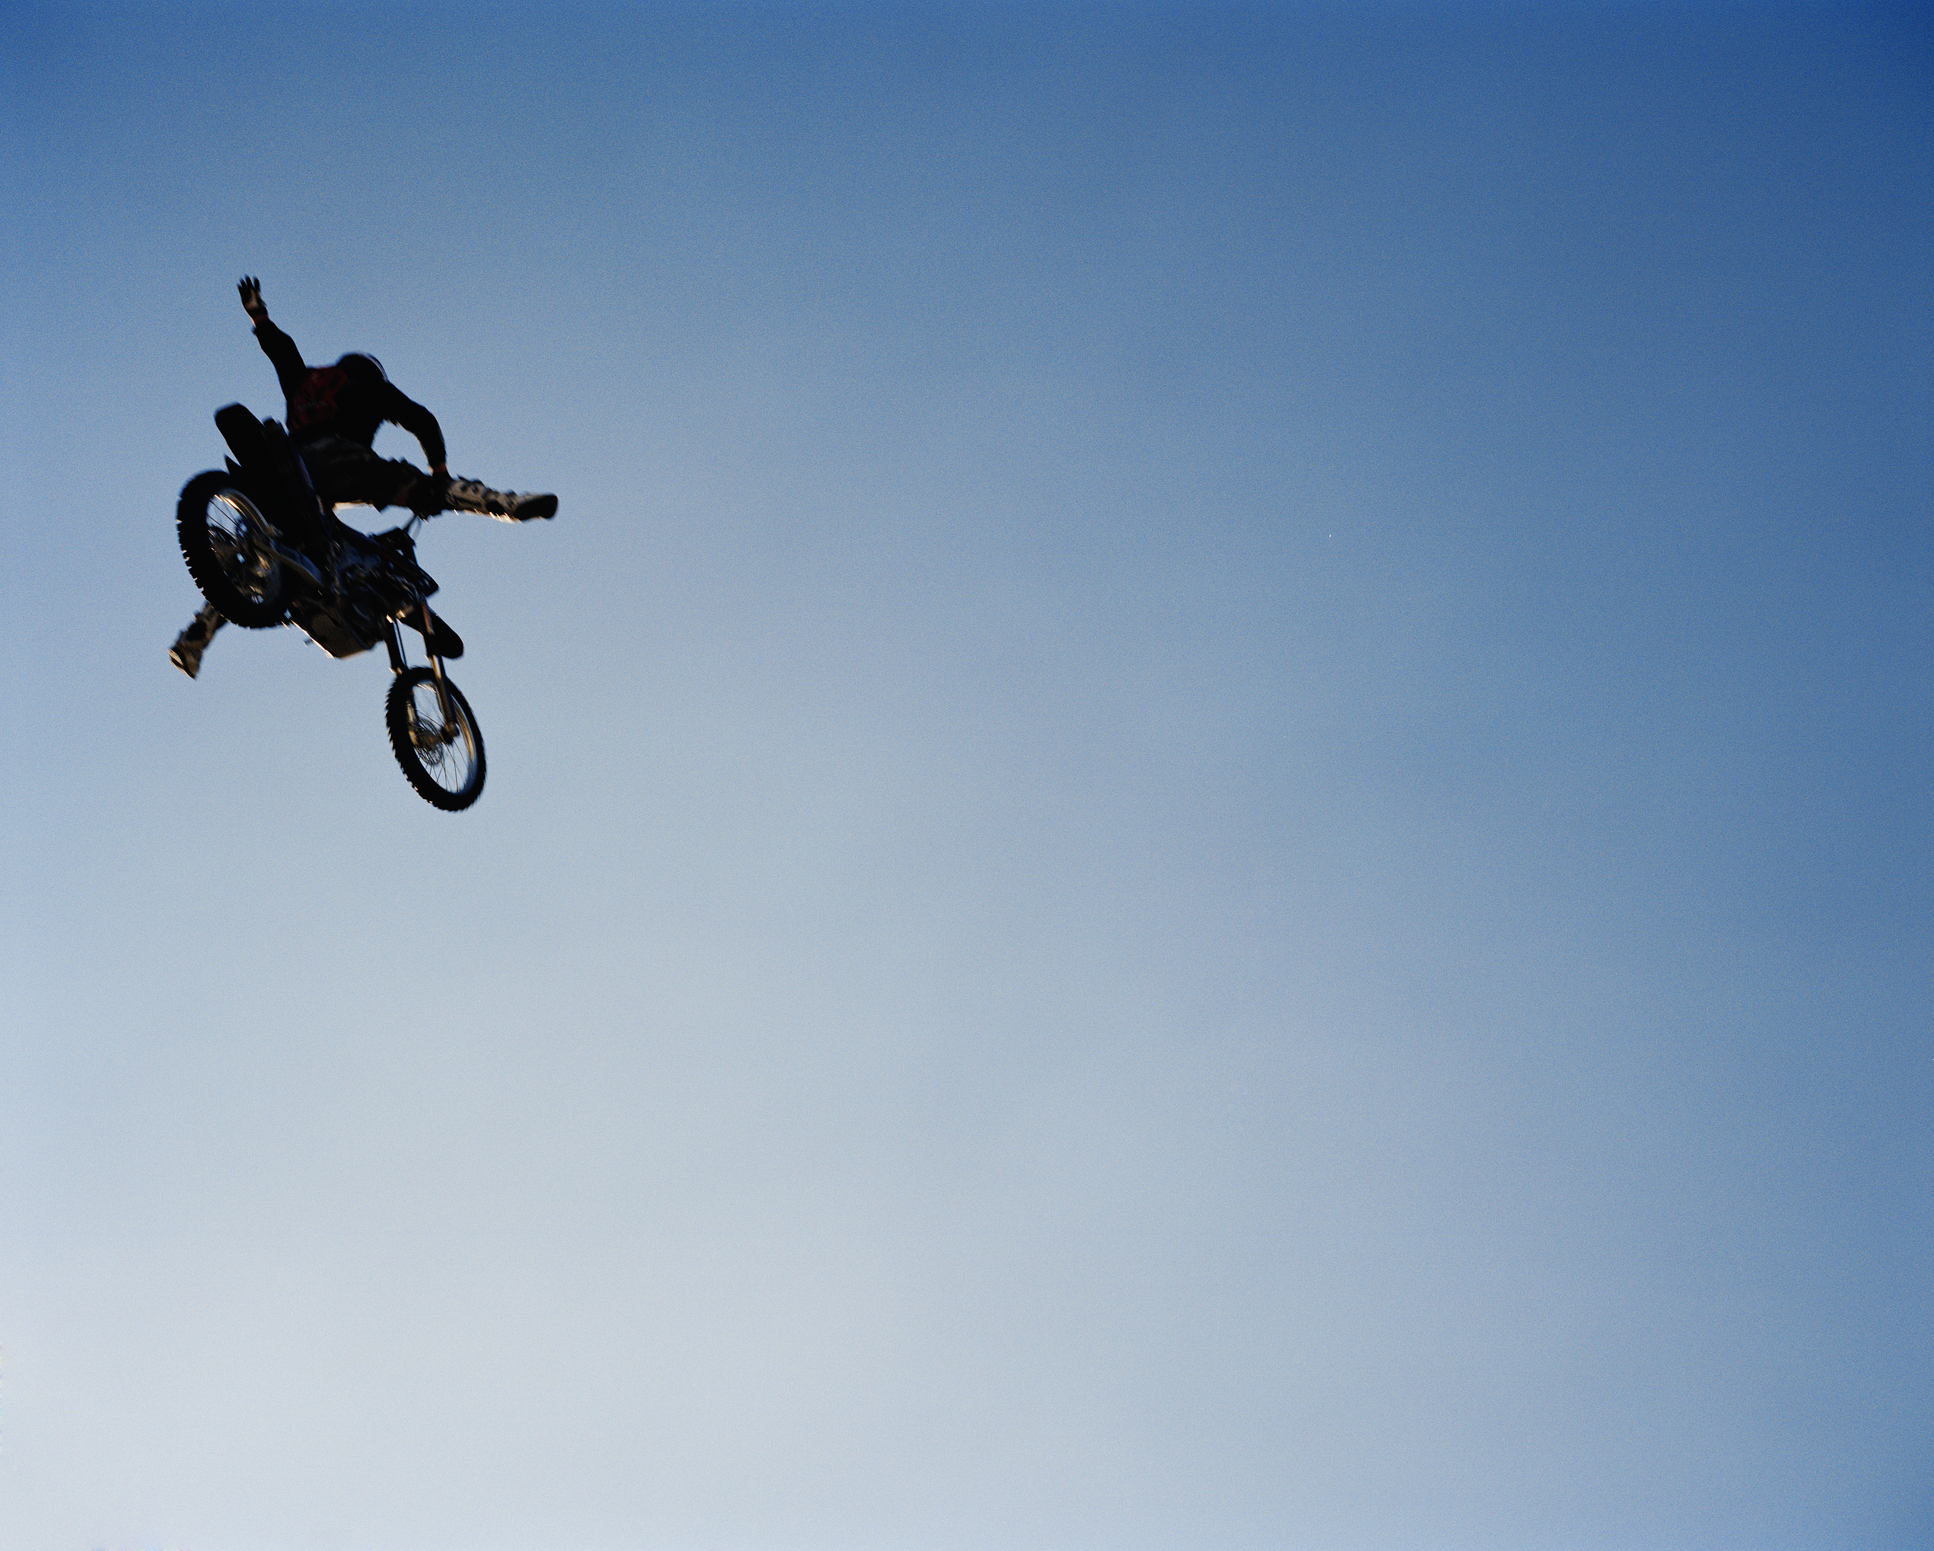 Man performing stunts on motorcycle, low angle view fine art photography